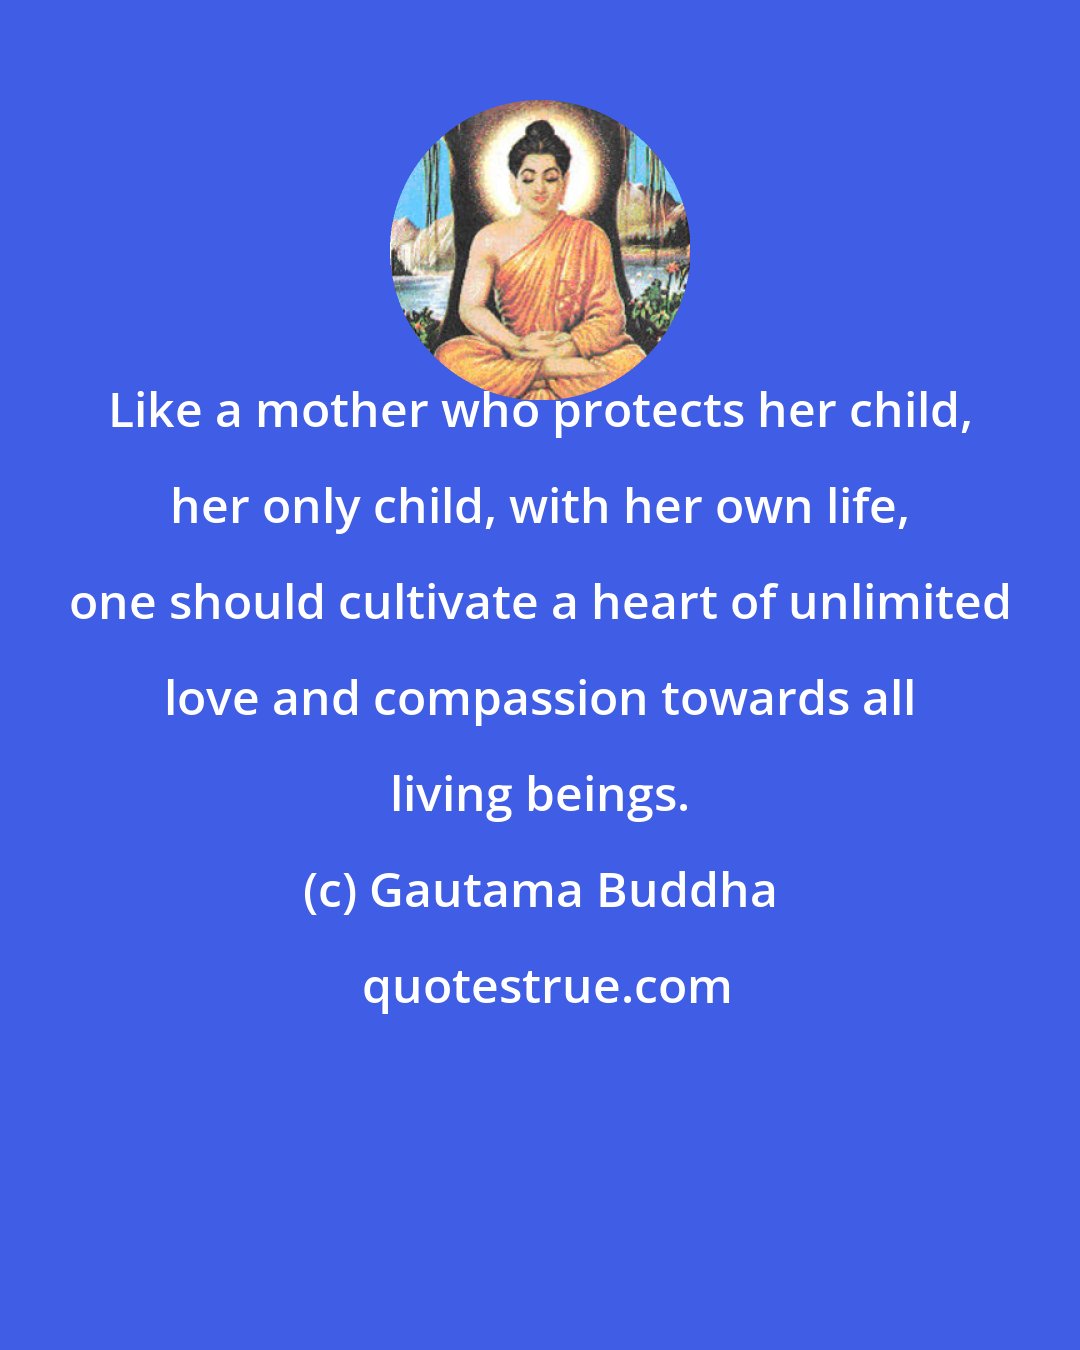 Gautama Buddha: Like a mother who protects her child, her only child, with her own life, one should cultivate a heart of unlimited love and compassion towards all living beings.